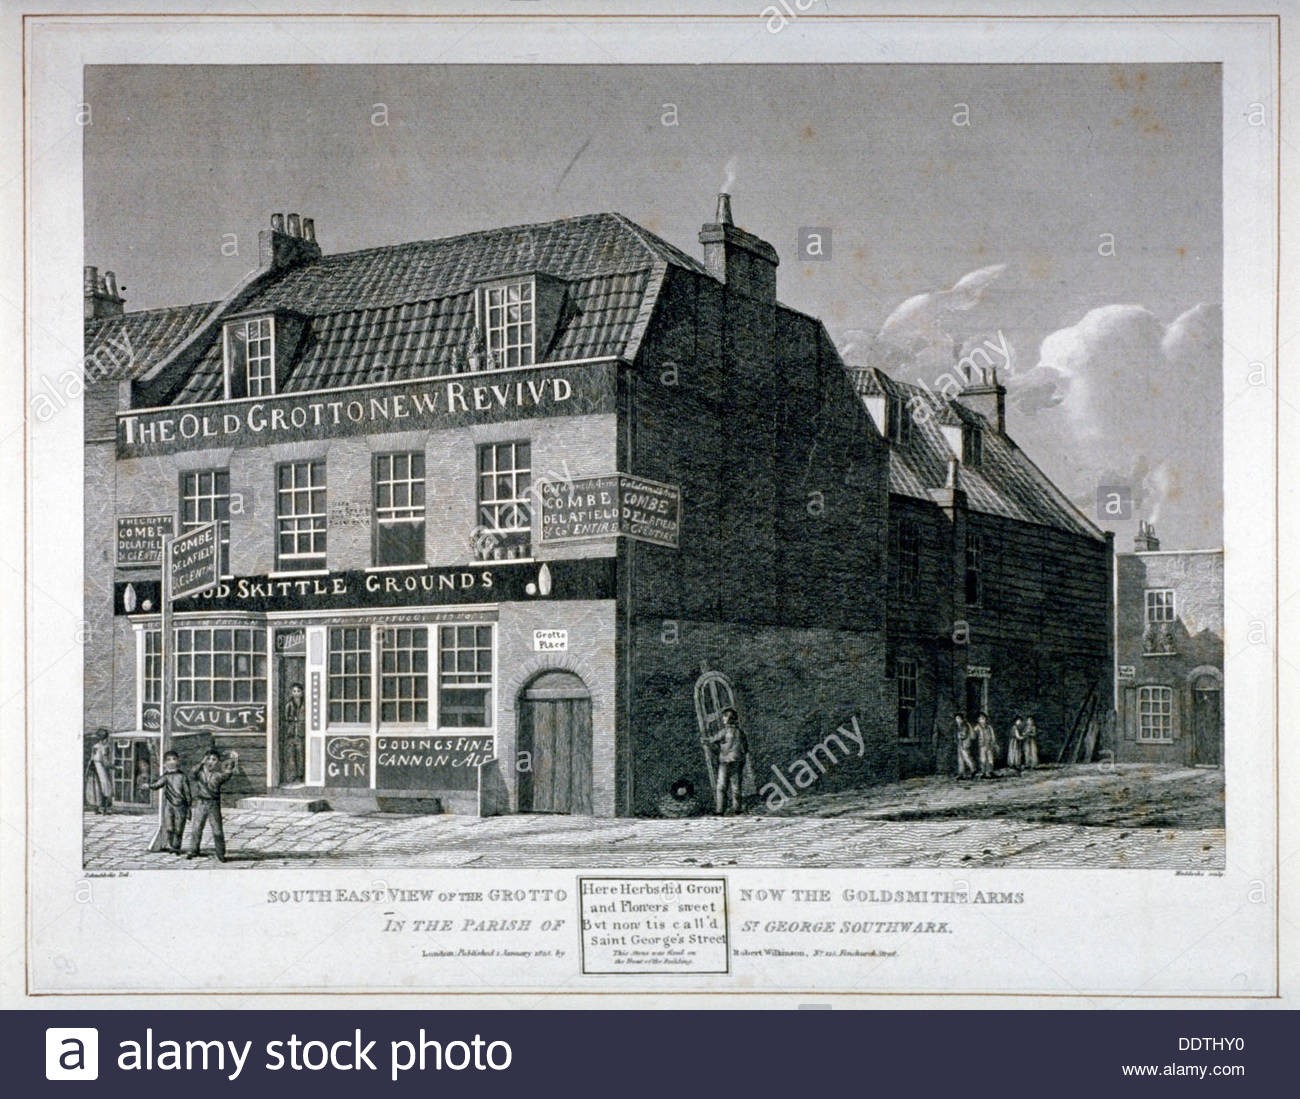 South-east view of the Grotto Inn, St Georges Street, Southwark, London, 1825. Roughly where the.jpg